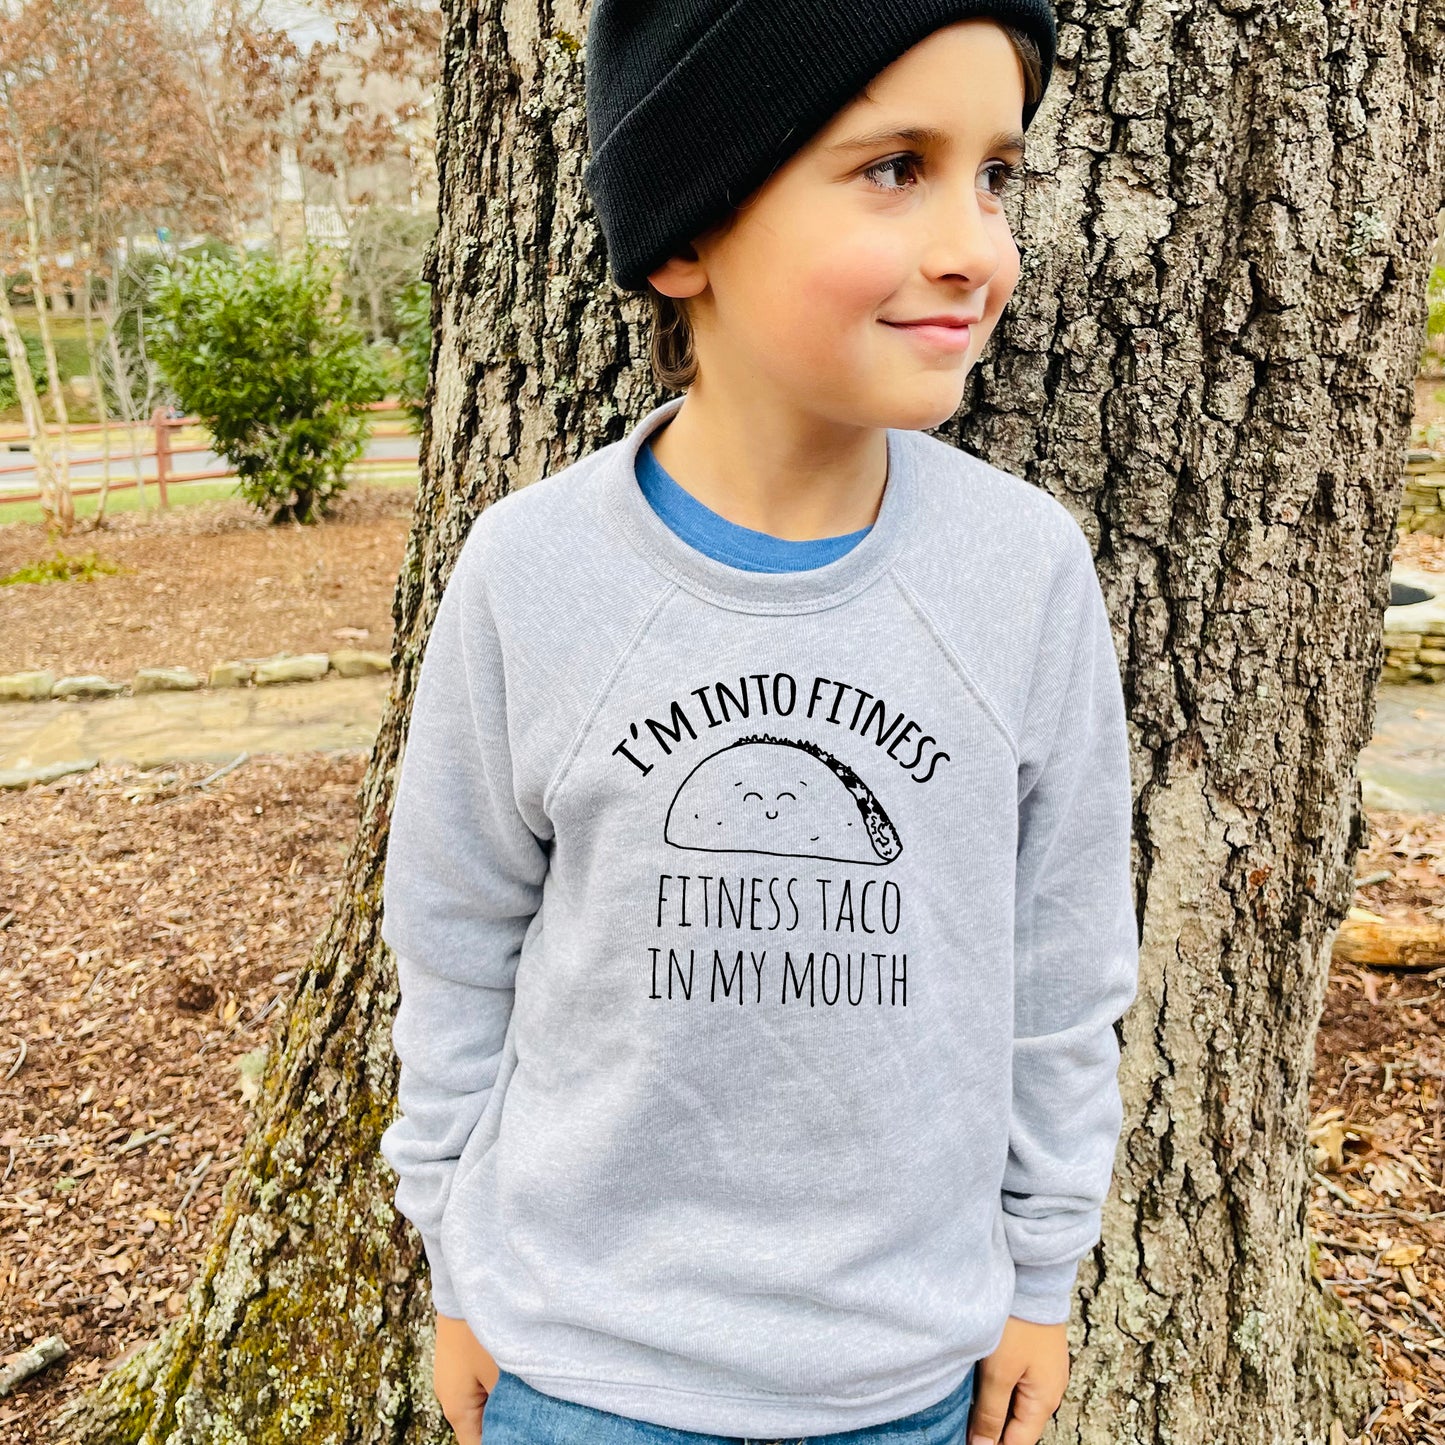 I'm Into Fitness, Fitness Taco In My Mouth - Kid's Sweatshirt - Heather Gray or Mauve